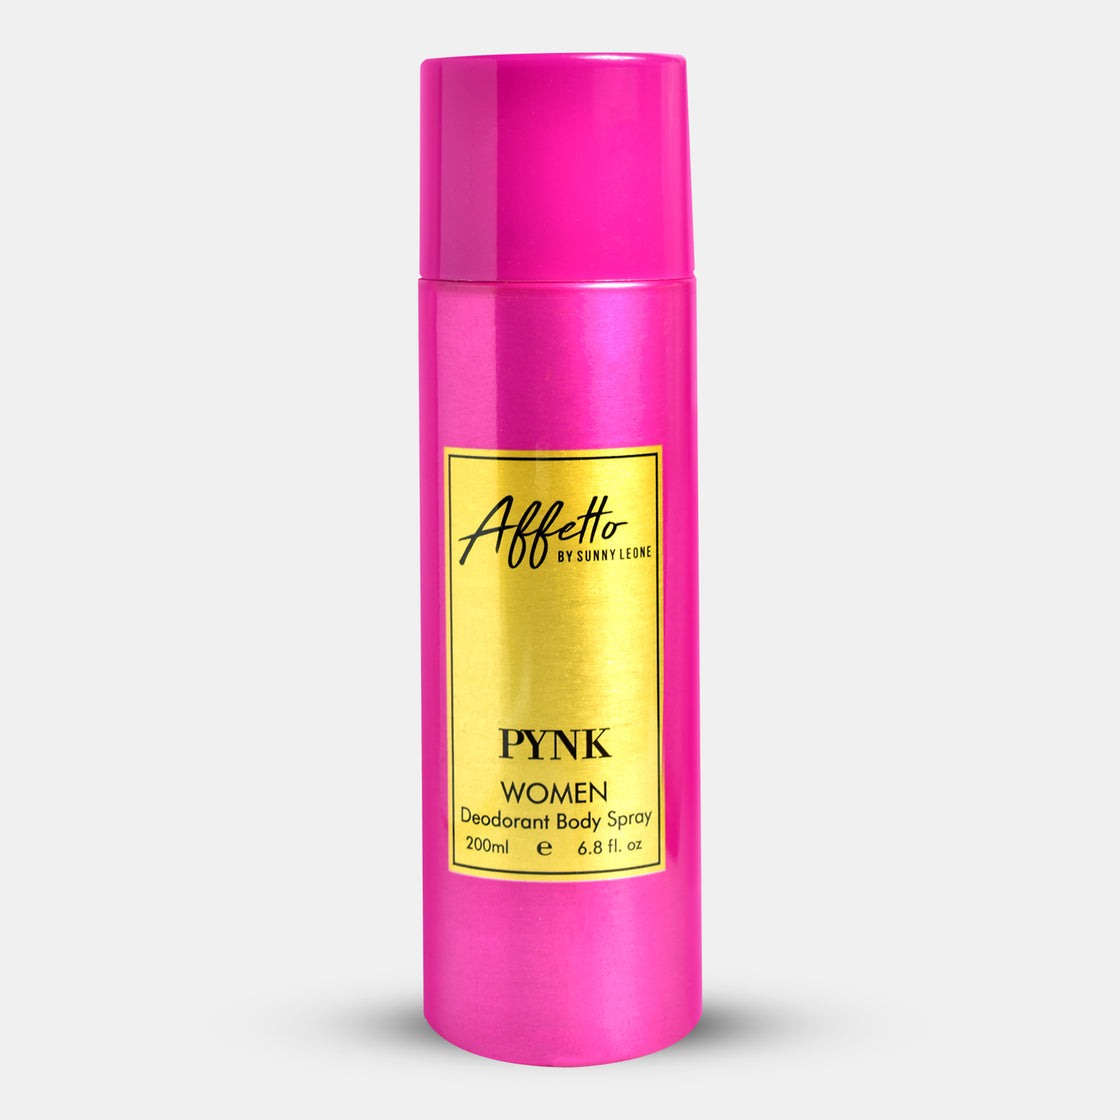 PYNK- FOR HER AFFETTO BY SUNNY LEONE -200ML